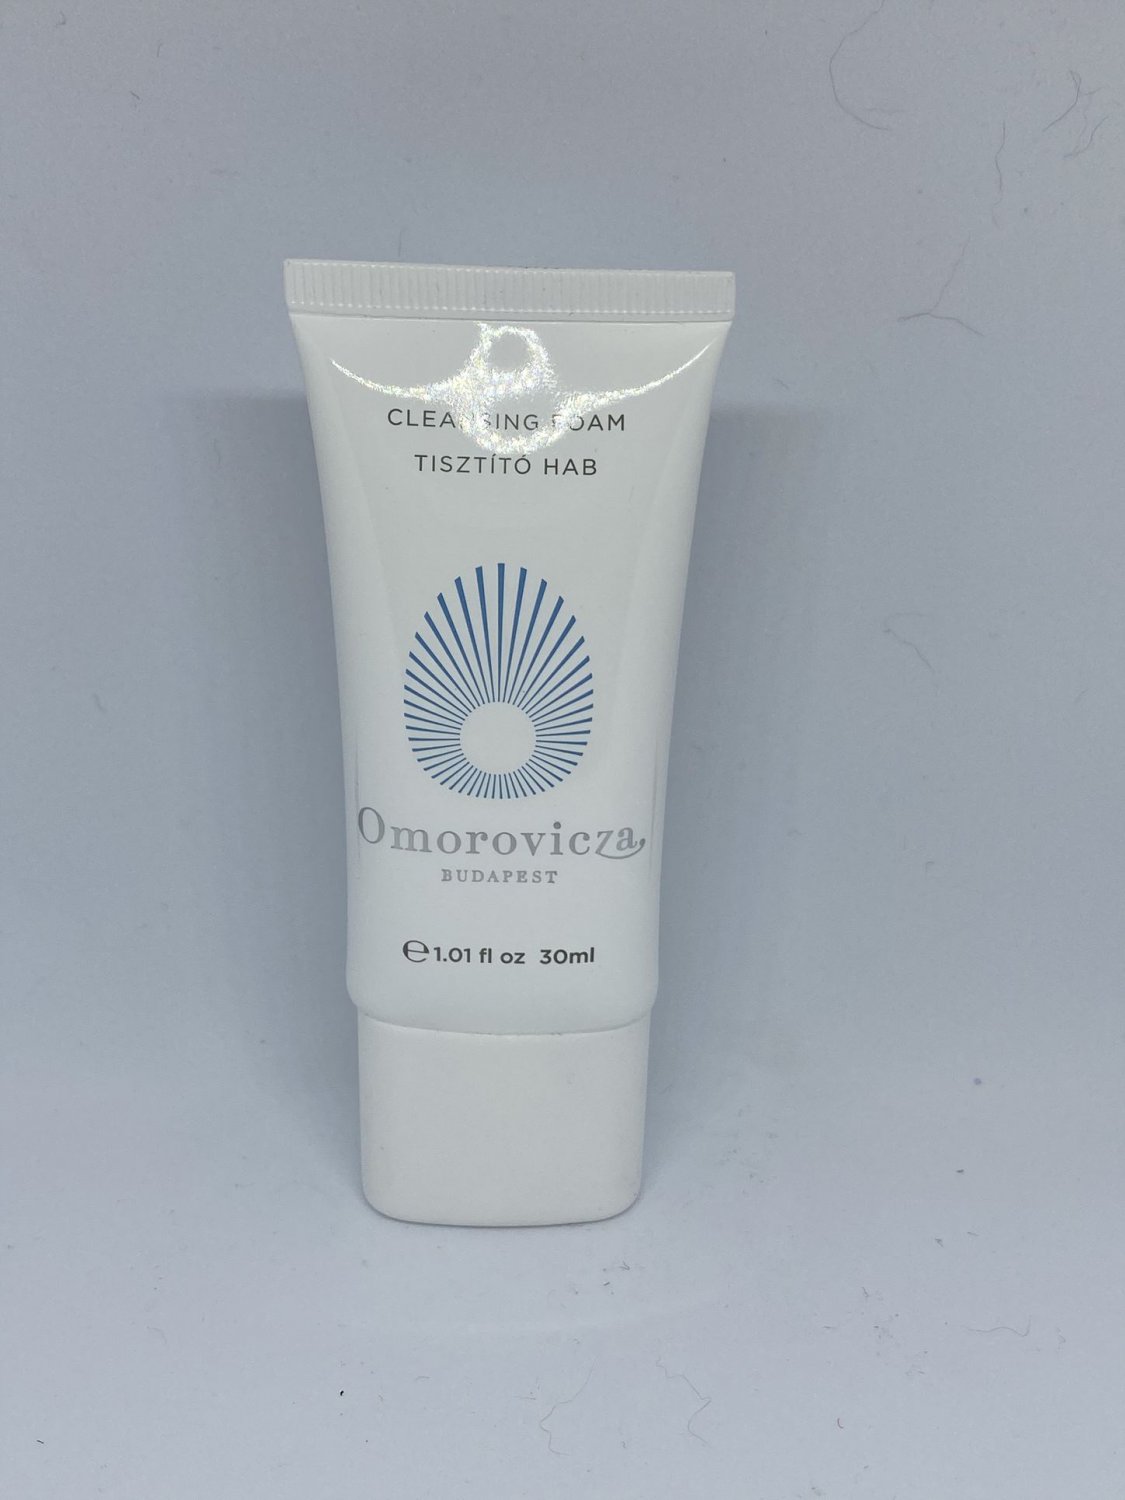 Omorovicza Budapest Cleansing Foam Travel Size Facial Wash Cleanser